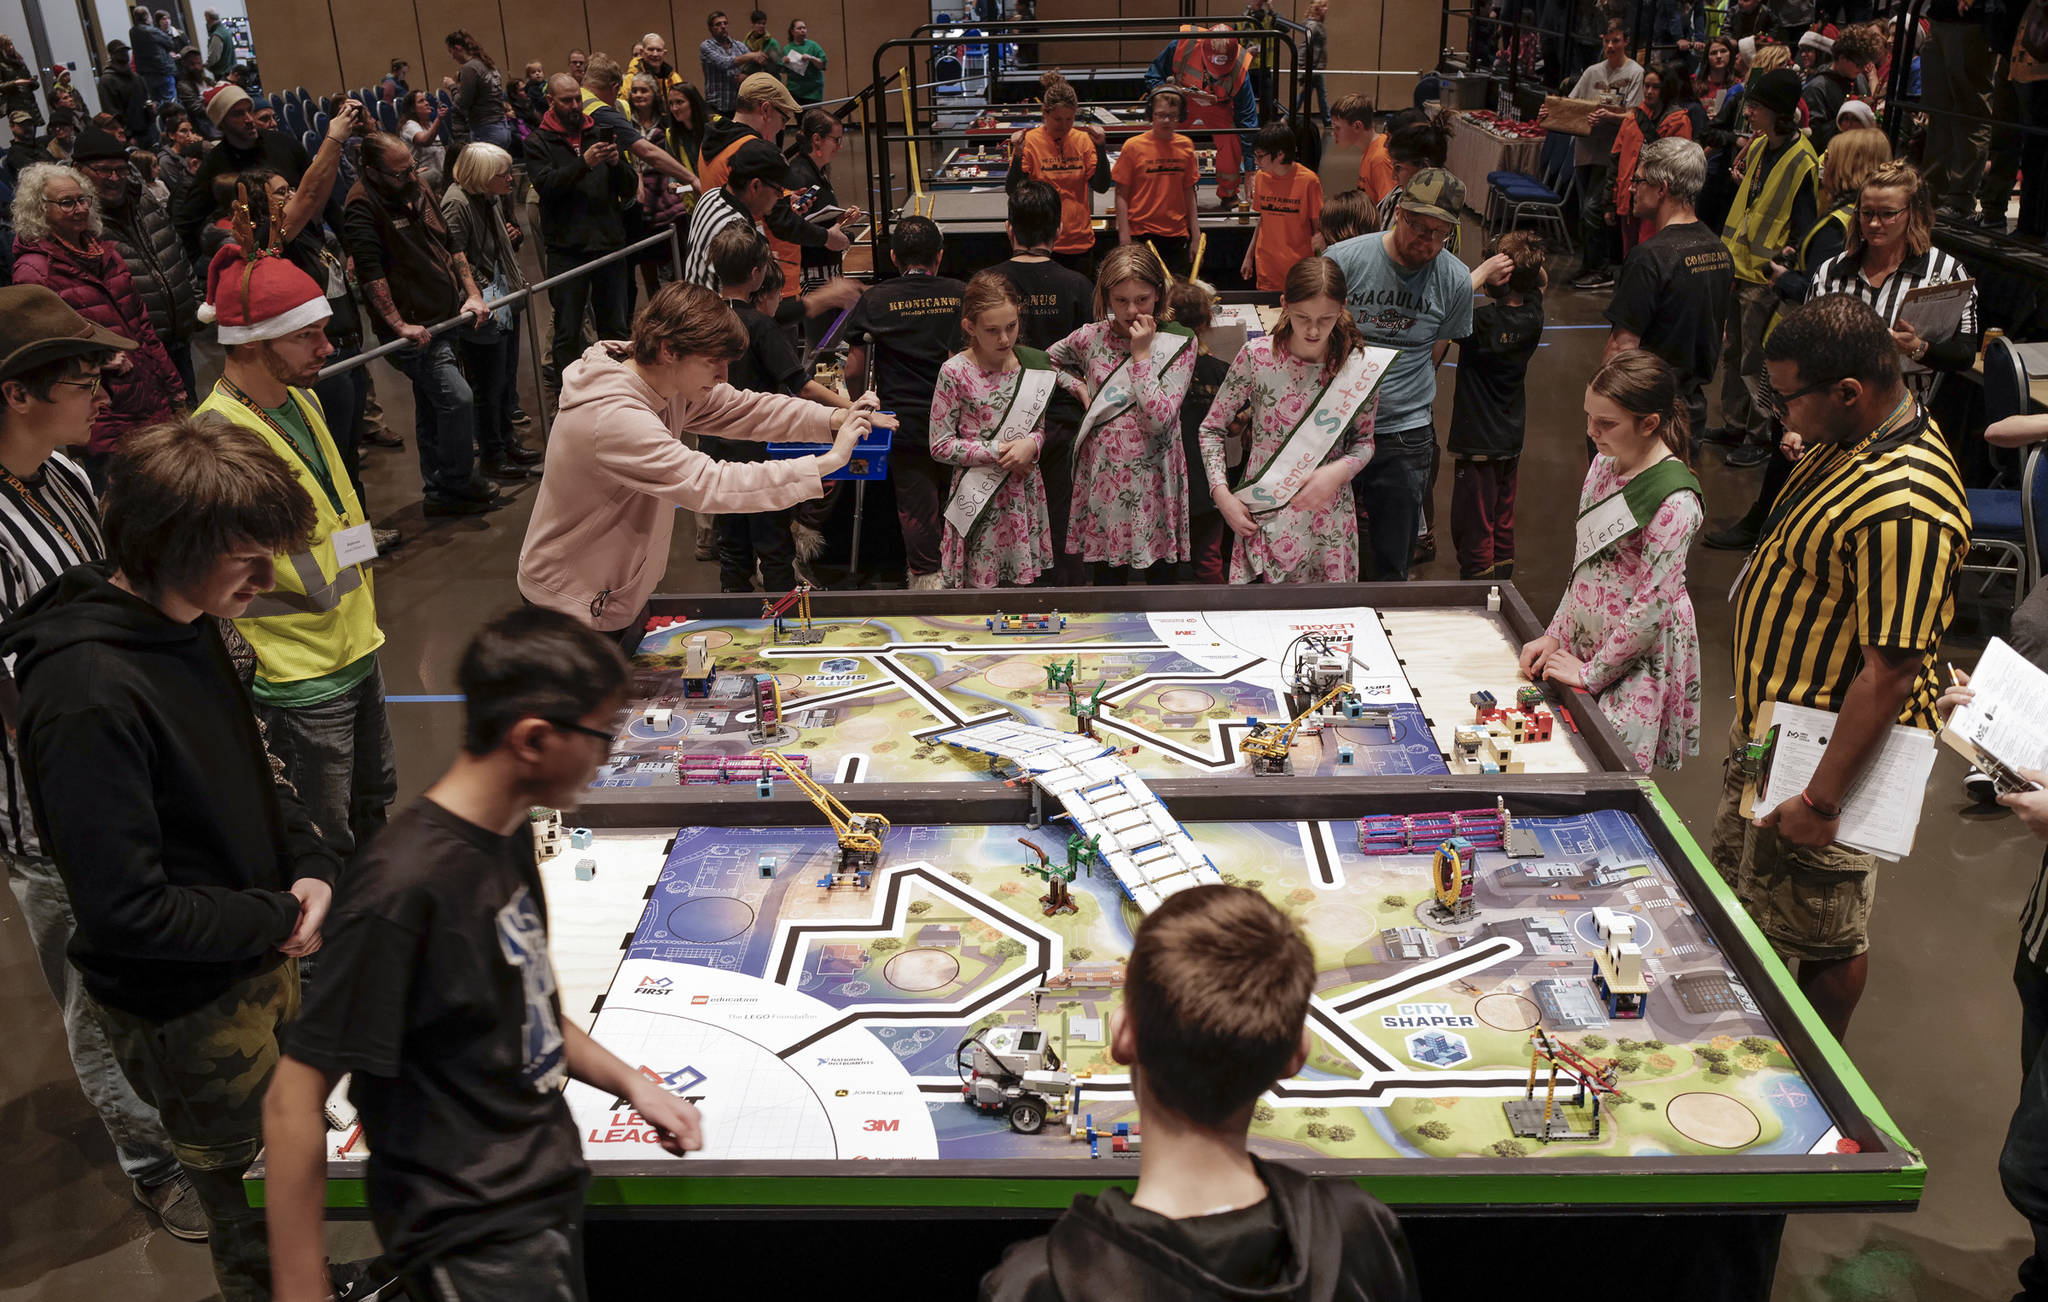 The Petersburg Vikings, below, and Science Sisters teams watch their robots complete in the First Lego League Challenge during the Juneau Robot Jamboree at Centennial Hall on Saturday, Dec. 14, 2019. Twenty teams, two remotely, competed in the First Lego League and four more in the Junior League. the robot performance is one of four parts to the contest. The students are also graded on teamwork, a research project and robot design. Top teams will earn entry to the Alaska State Championship on Feb. 7-8, 2020, at Colony High School. (Michael Penn | Juneau Empire)